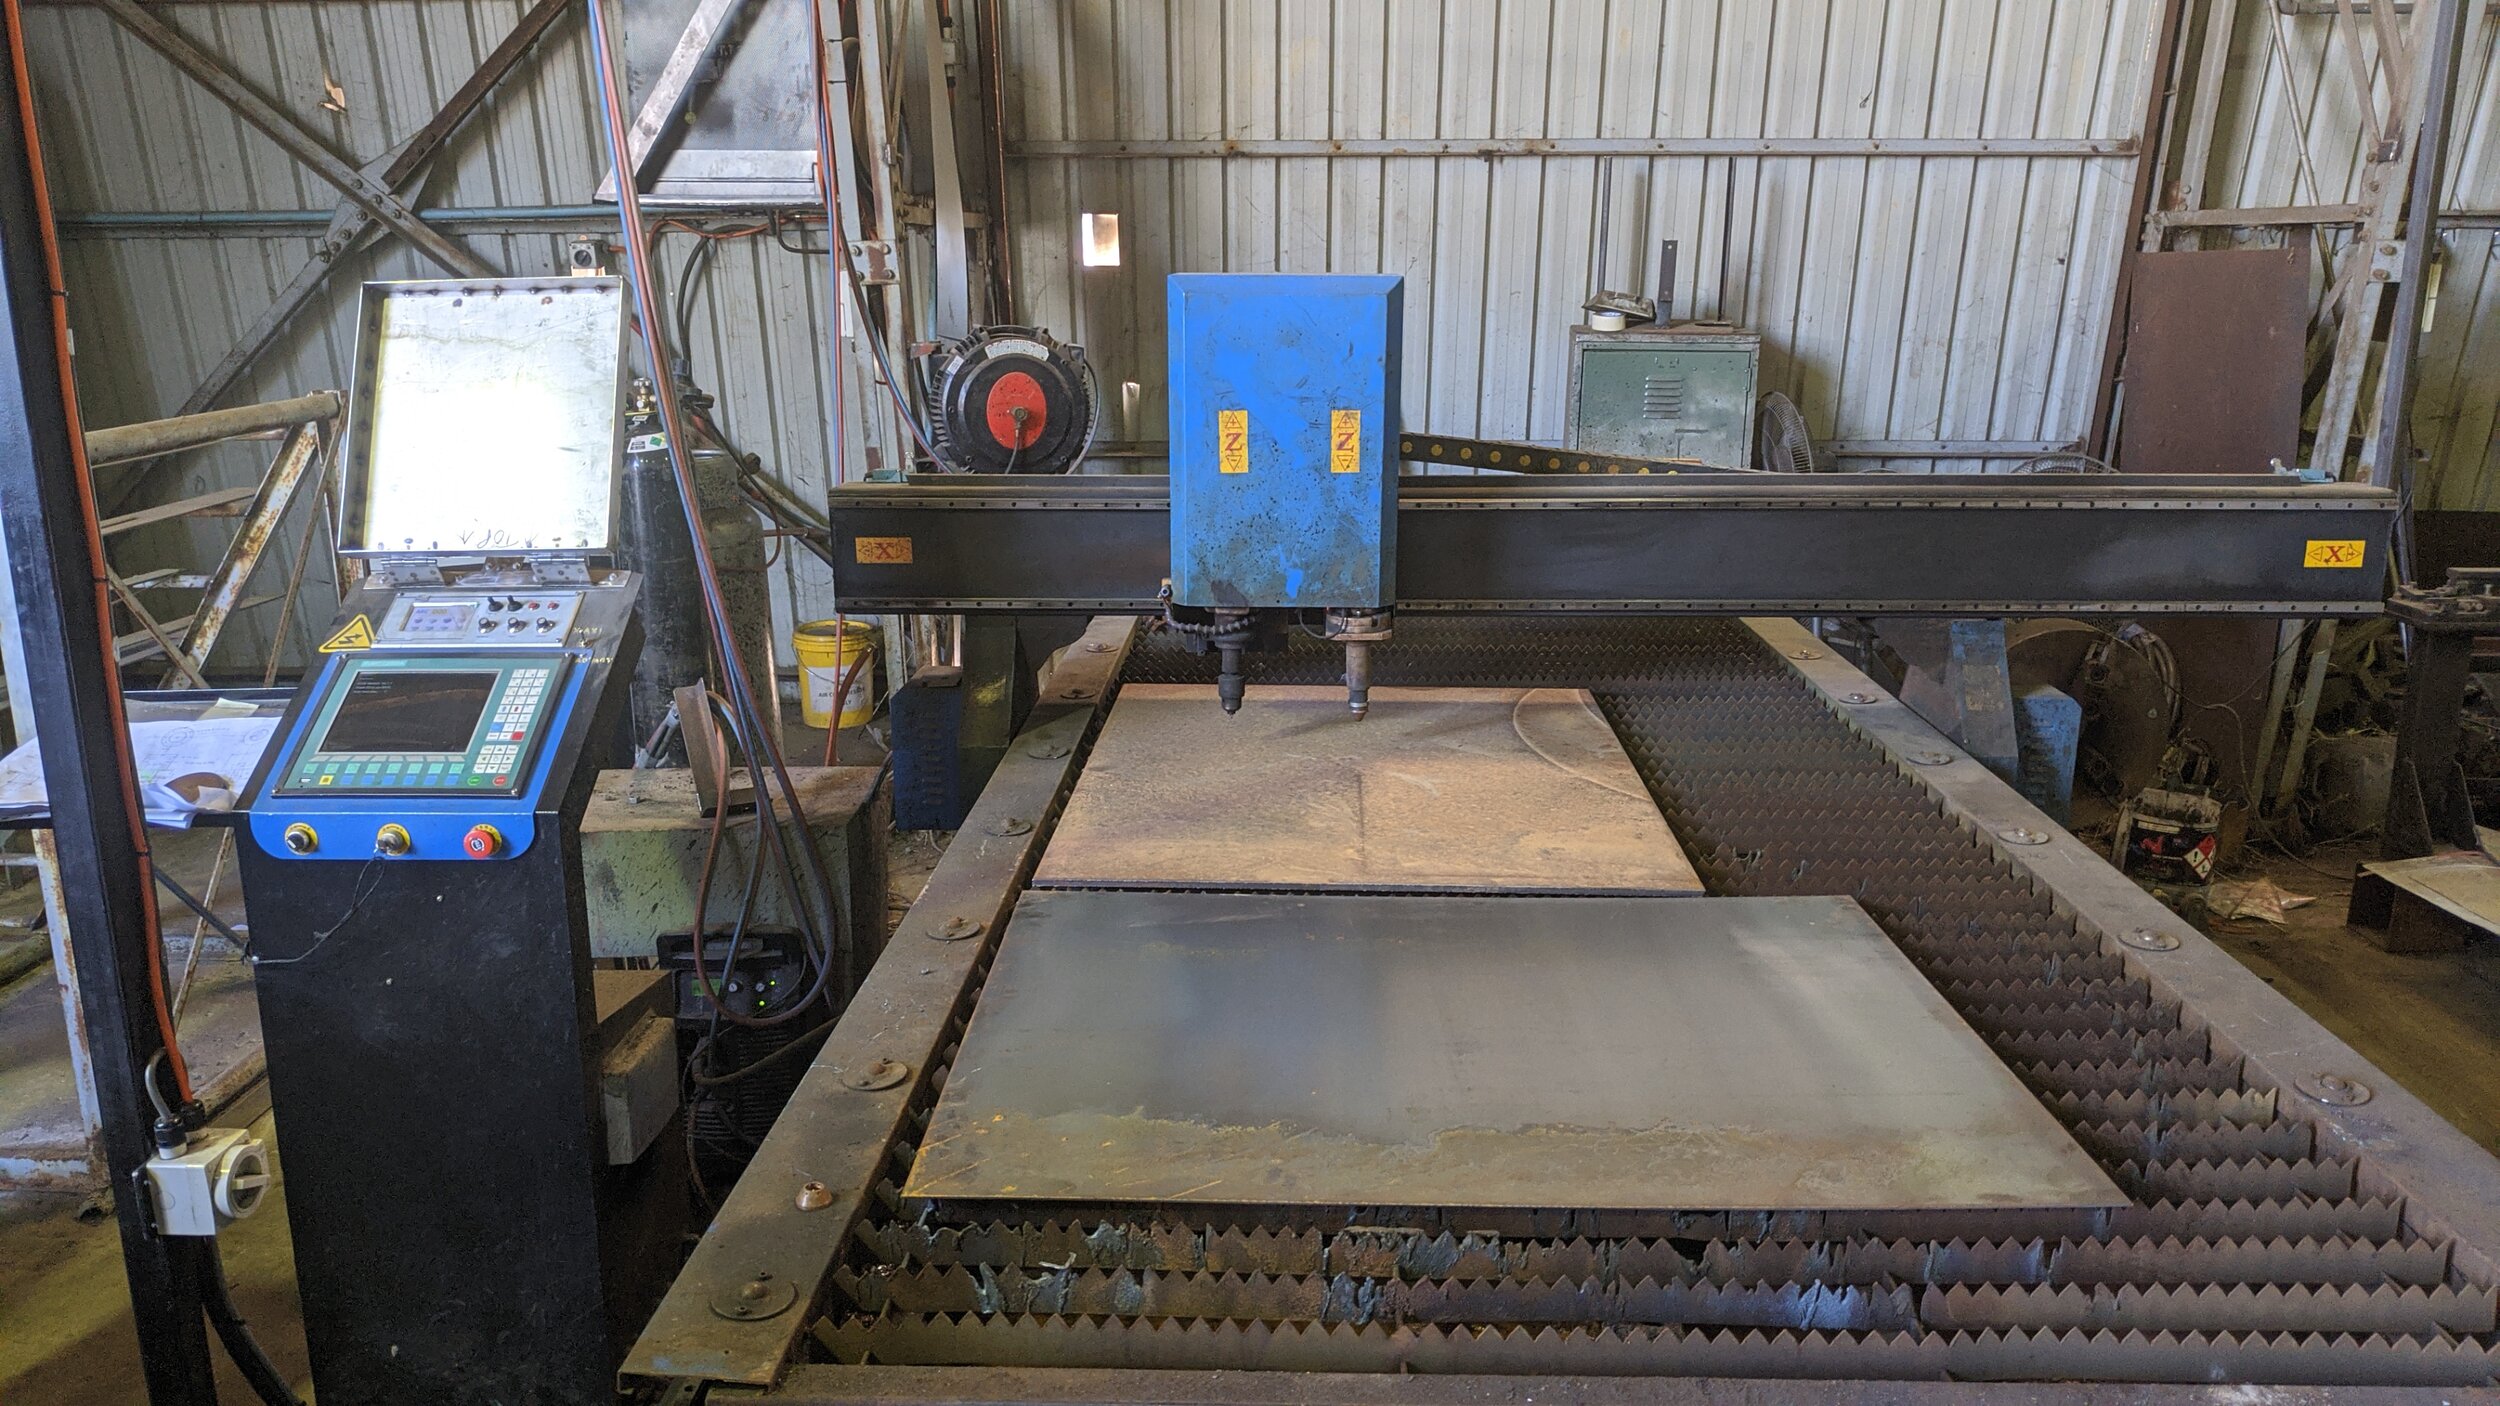   Onecnc CNC plasma:  500 rotary axis, 1.5m x3m bed, onboard drill MT3 